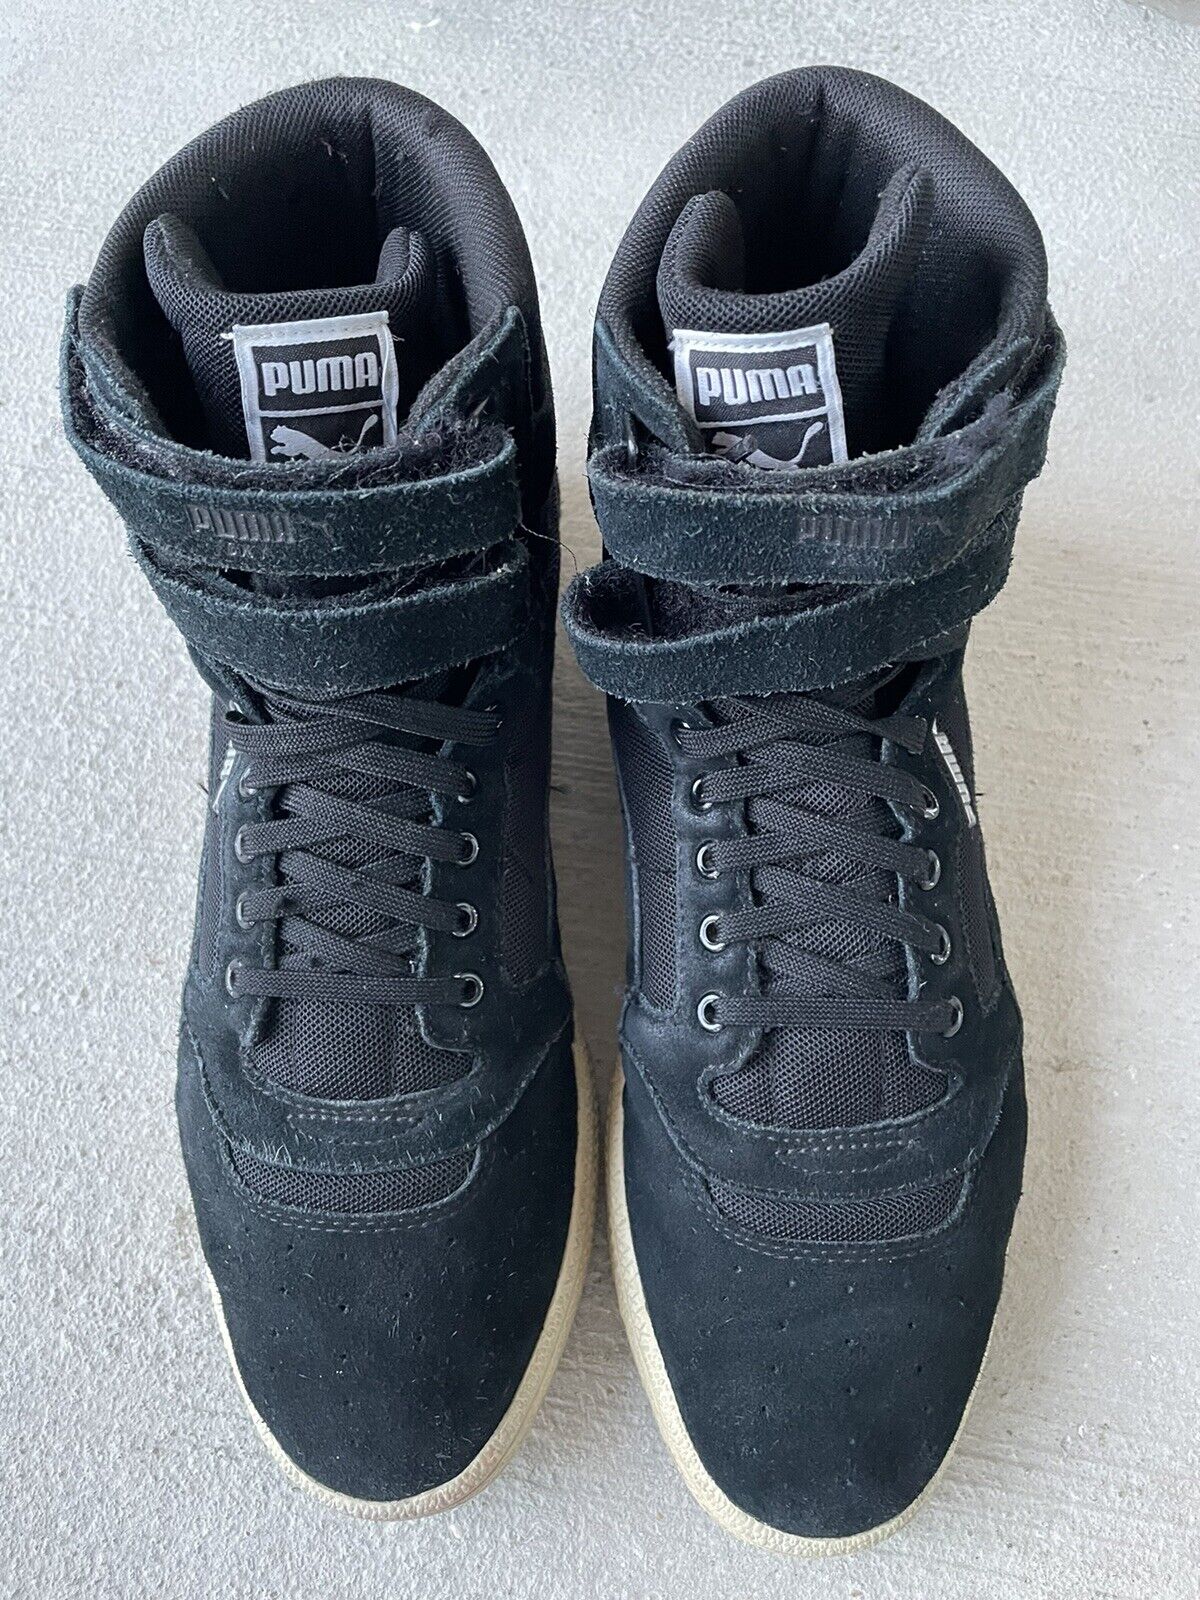 Puma Mens  High Top Boots Black Leather Suede Sne… - image 4